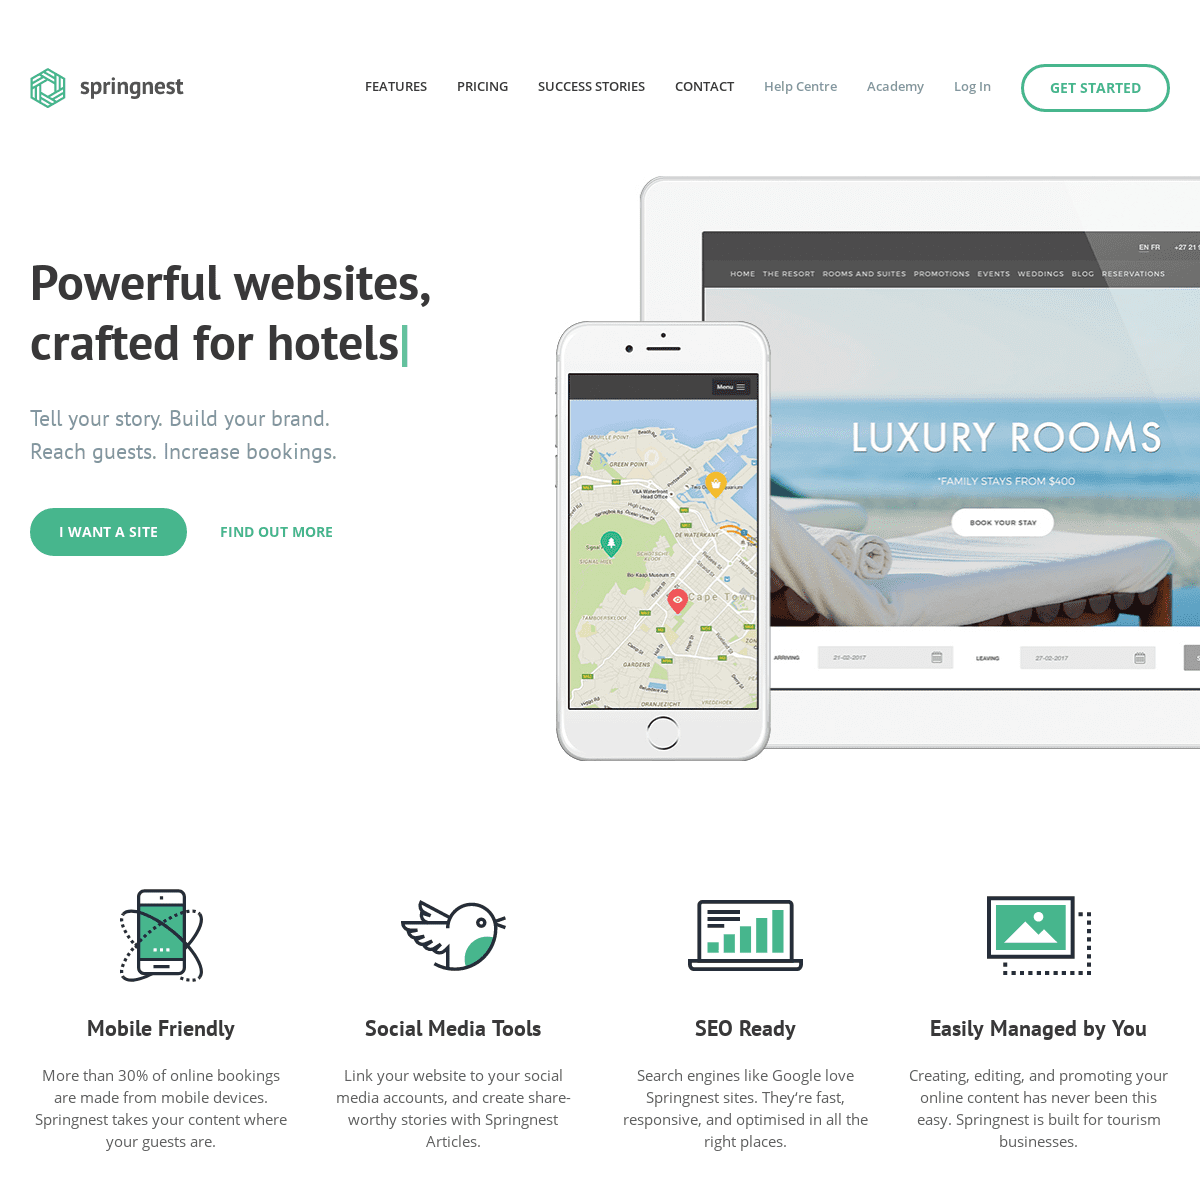 Springnest: Powerful Websites, Crafted for Tourism